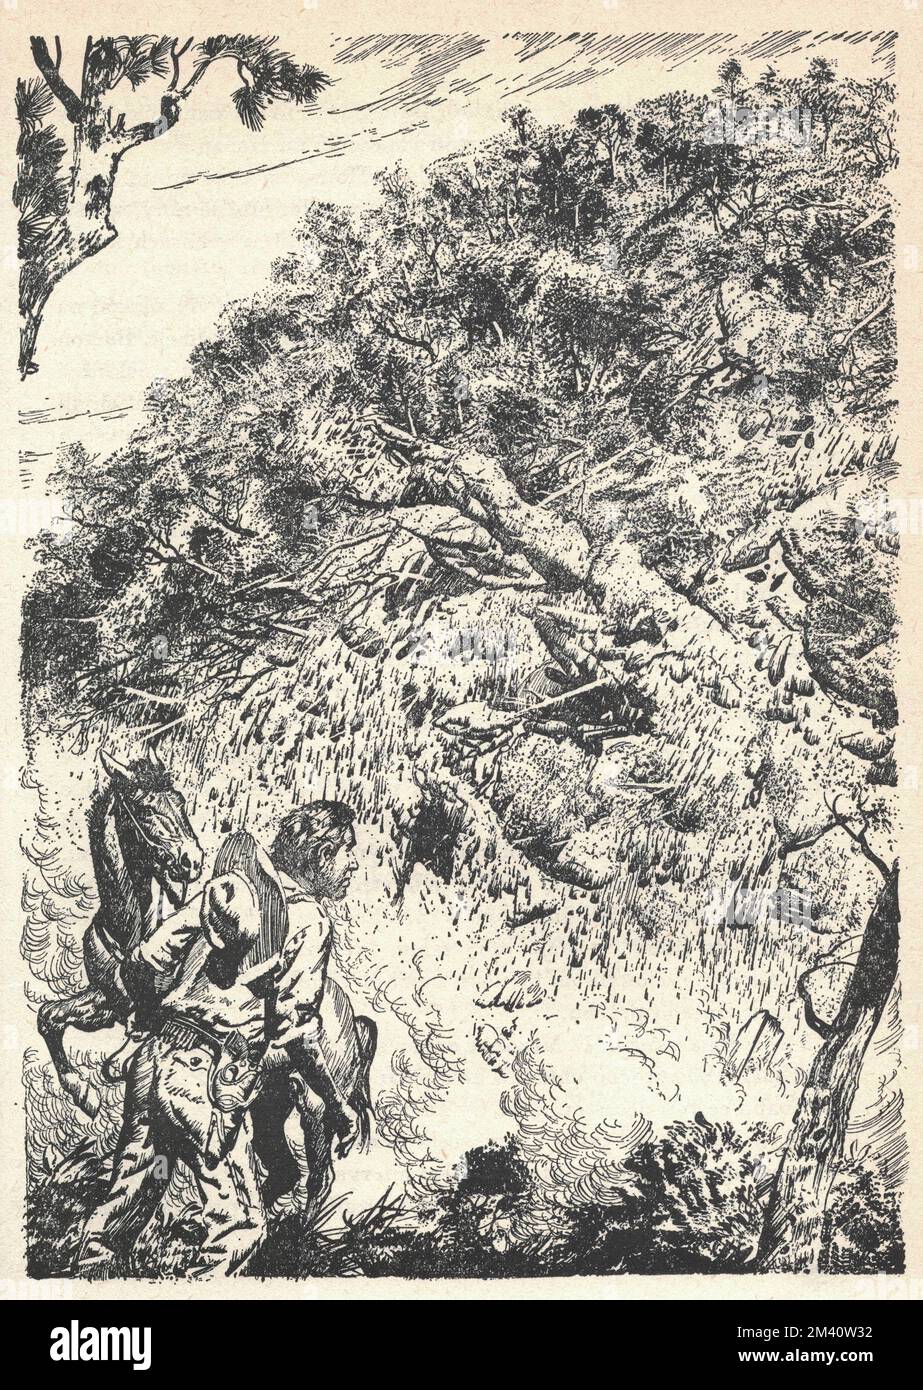 A cowboy in the wild west. A cowboy on the edge of a ravine. Old black and white illustration. Vintage drawing. Illustration by Zdenek Burian. Zdenek Michael Frantisek Burian (11 February 1905 in Koprivnice, Moravia, Austria-Hungary 1 July 1981 in Prague, Czechoslovakia) was a Czech painter, book illustrator and palaeoartist whose work played a central role in the development of palaeontological reconstruction. Originally recognised only in his native Czechoslovakia, Burian's fame later spread to an international audience during a remarkable career spanning six decades (1930s to 1980s). He is Stock Photo